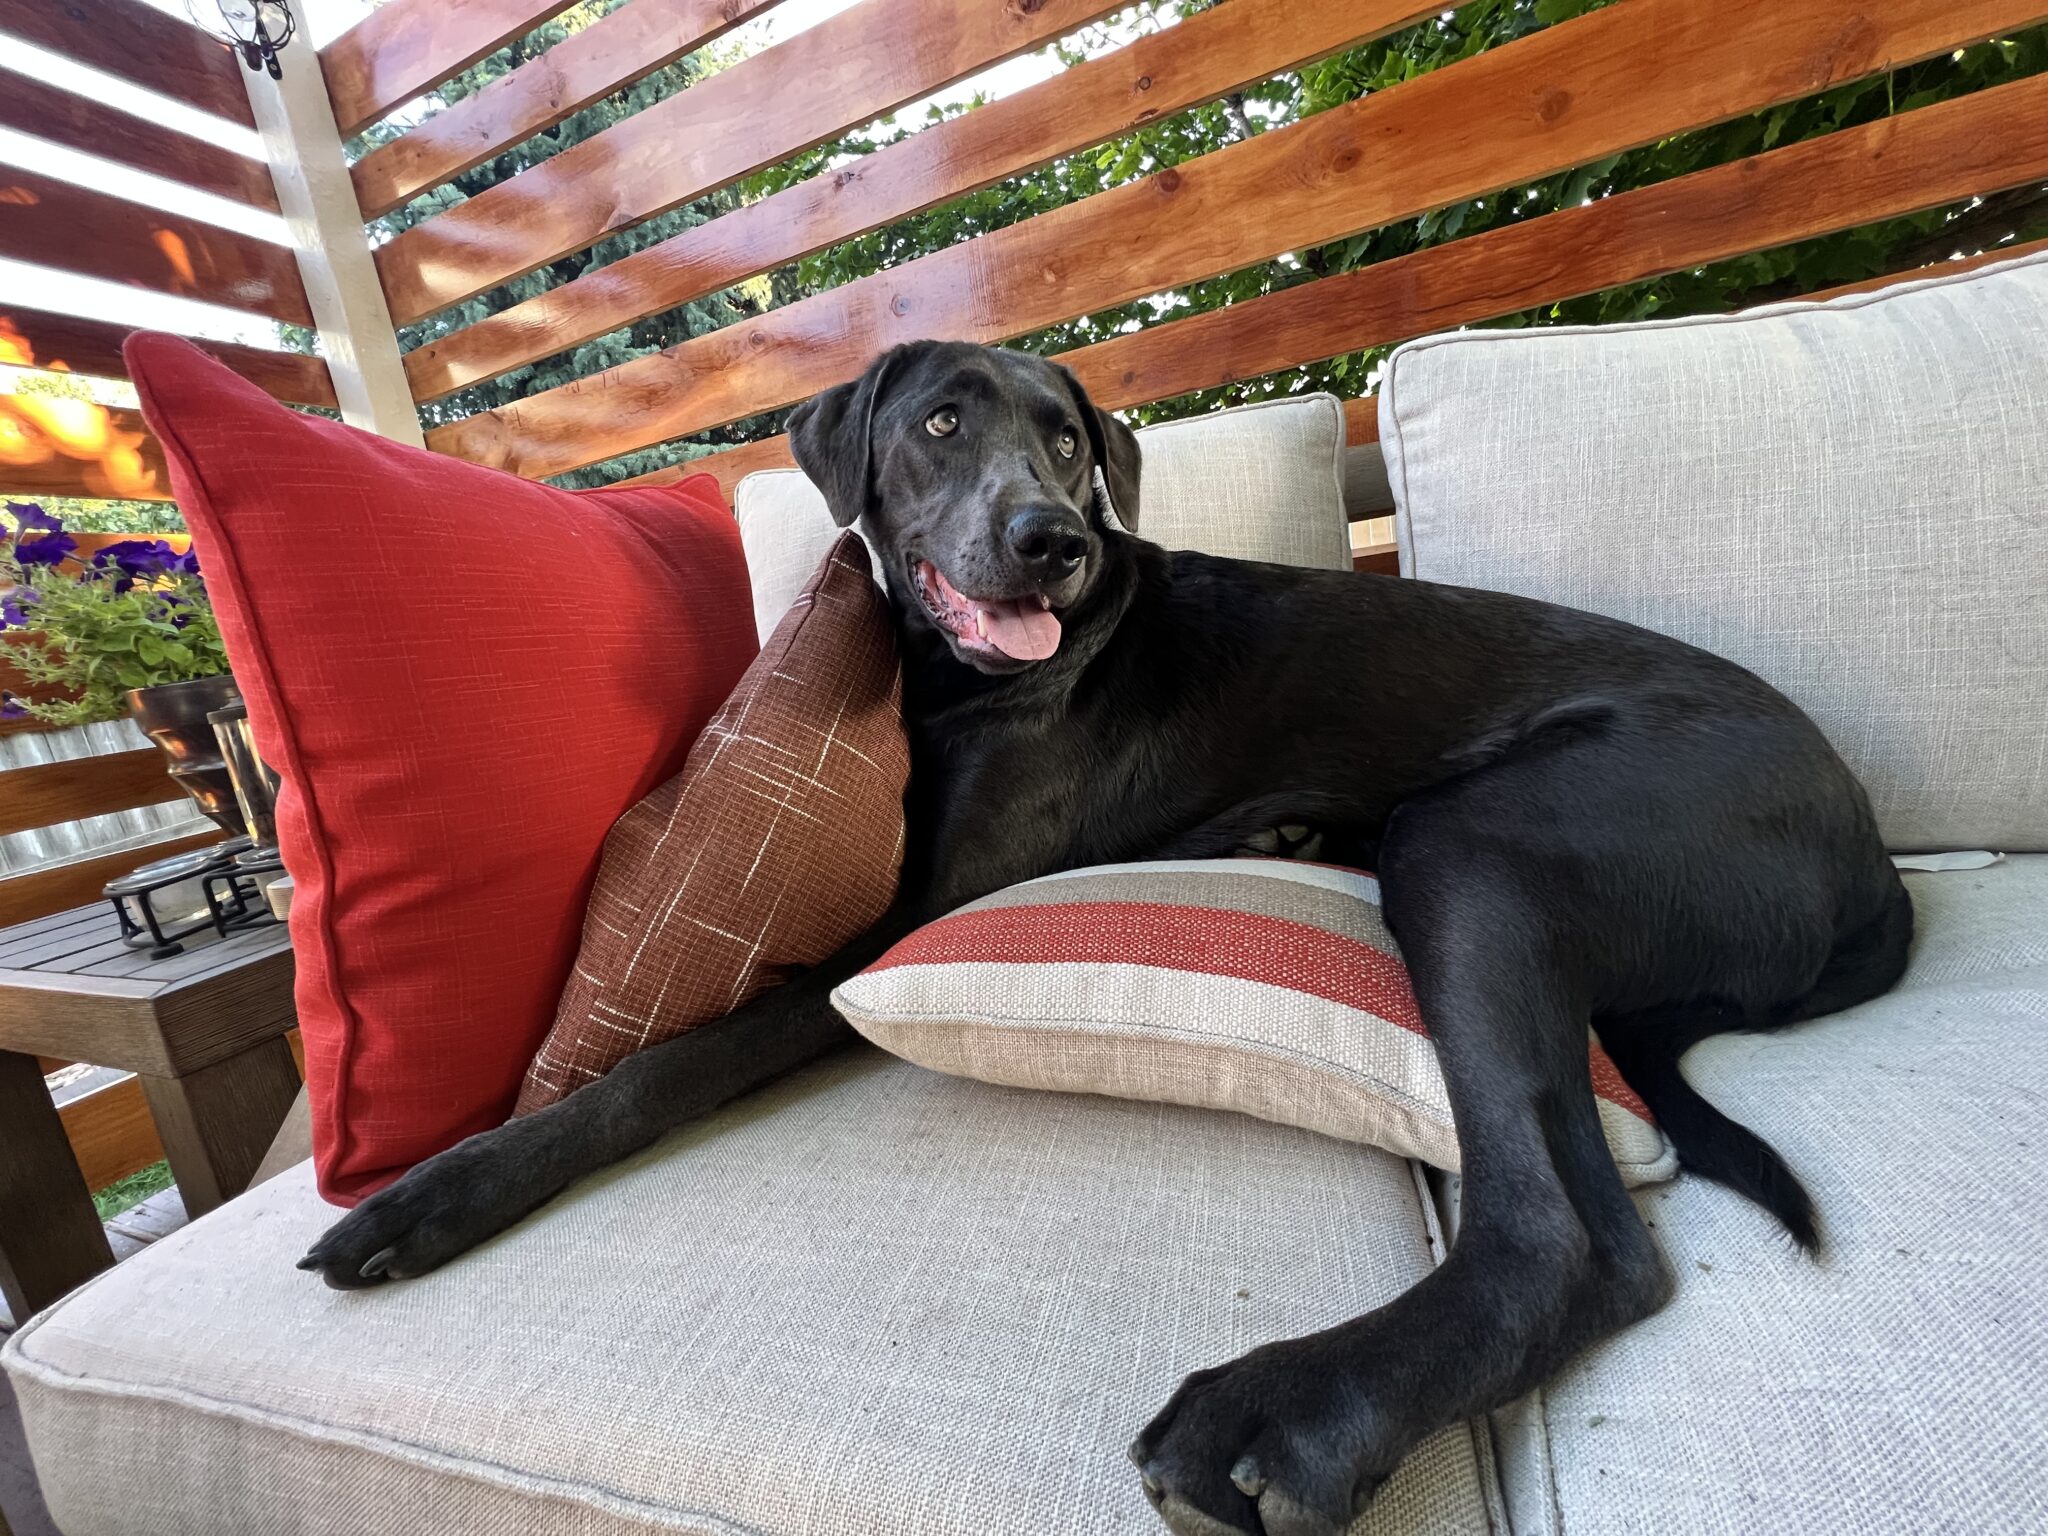 Charcoal colored lab sitting on patio furniture